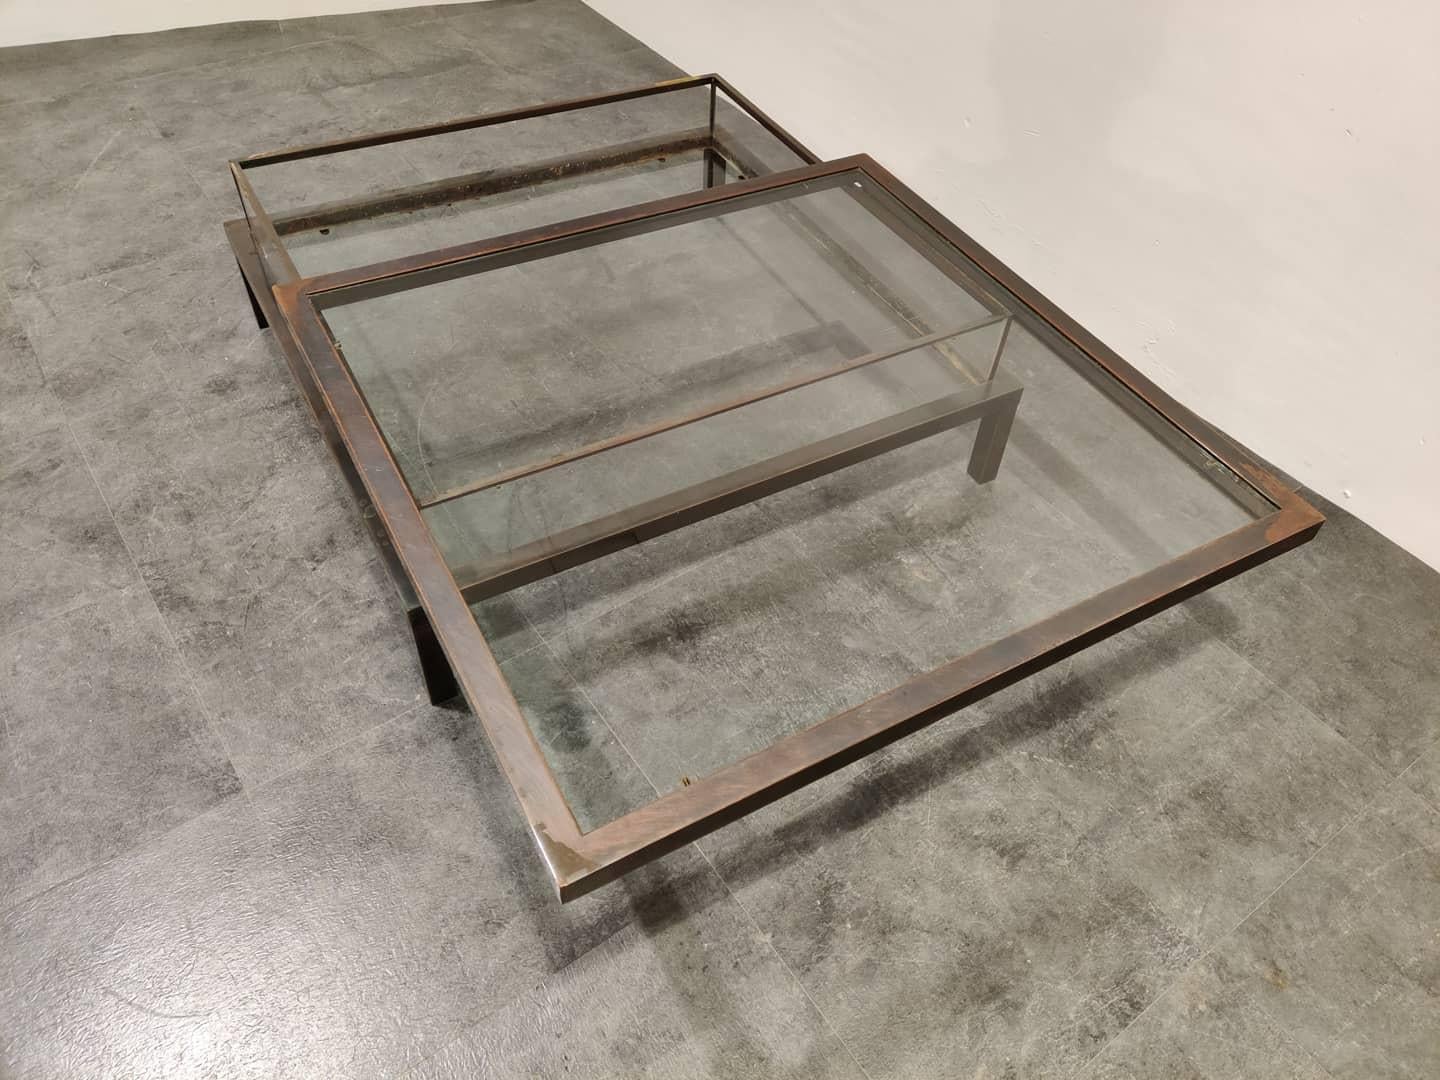 Vintage display coffee table with a sliding glass top.

This luxurious coffee table is made from copper, glass top and bottom and plexiglass sides.

It is ideal to display curio and store magazines.

Lovely original patinated